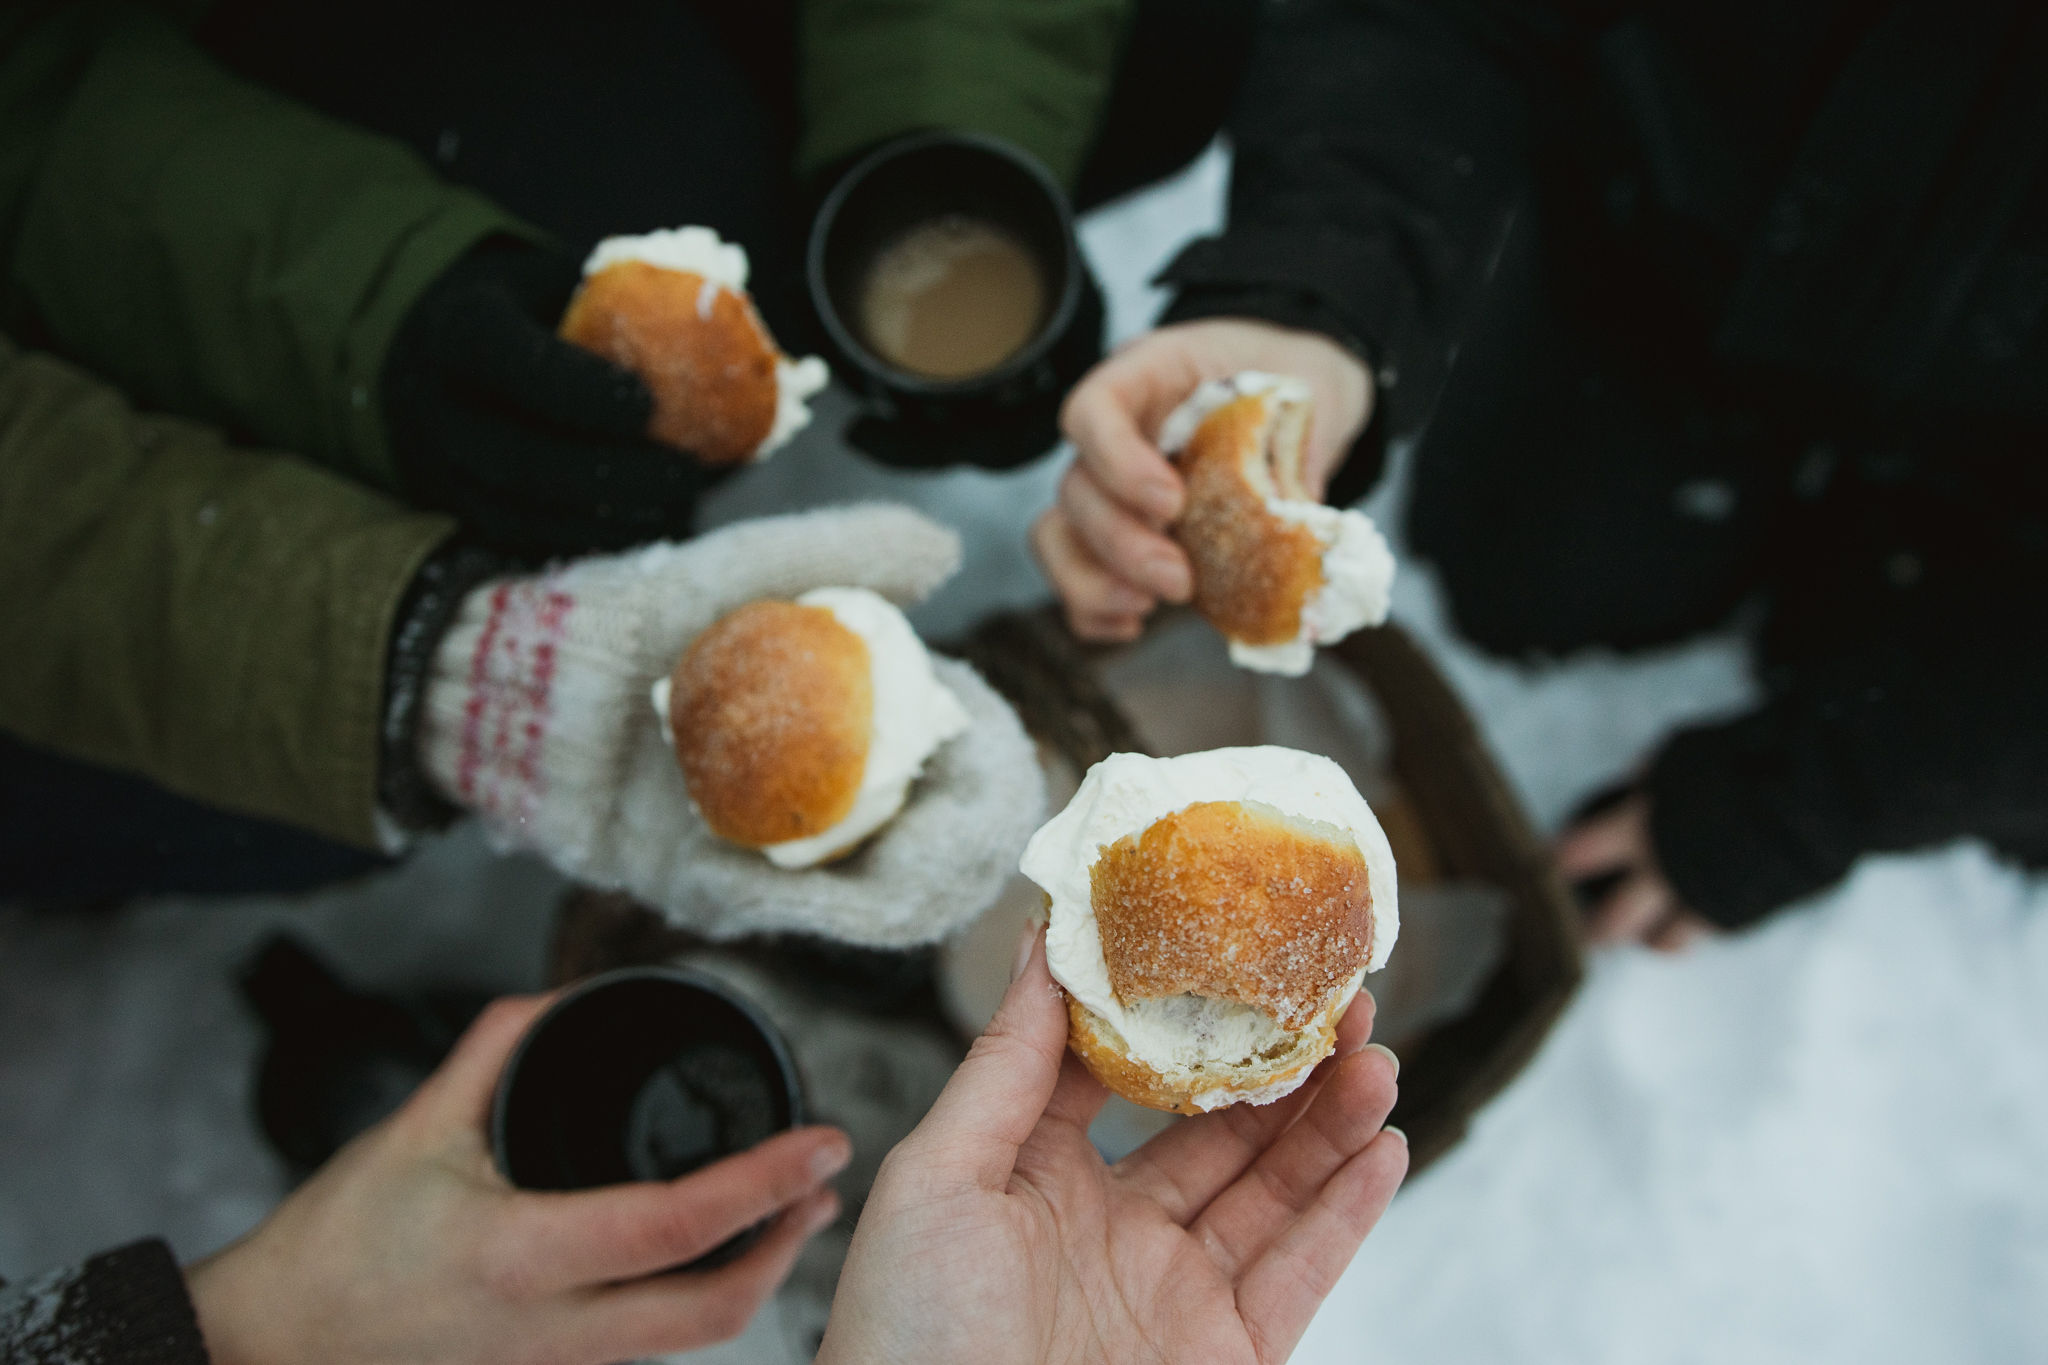 Finnish celebrating Shrovetide by eating buns outdoors in Finland